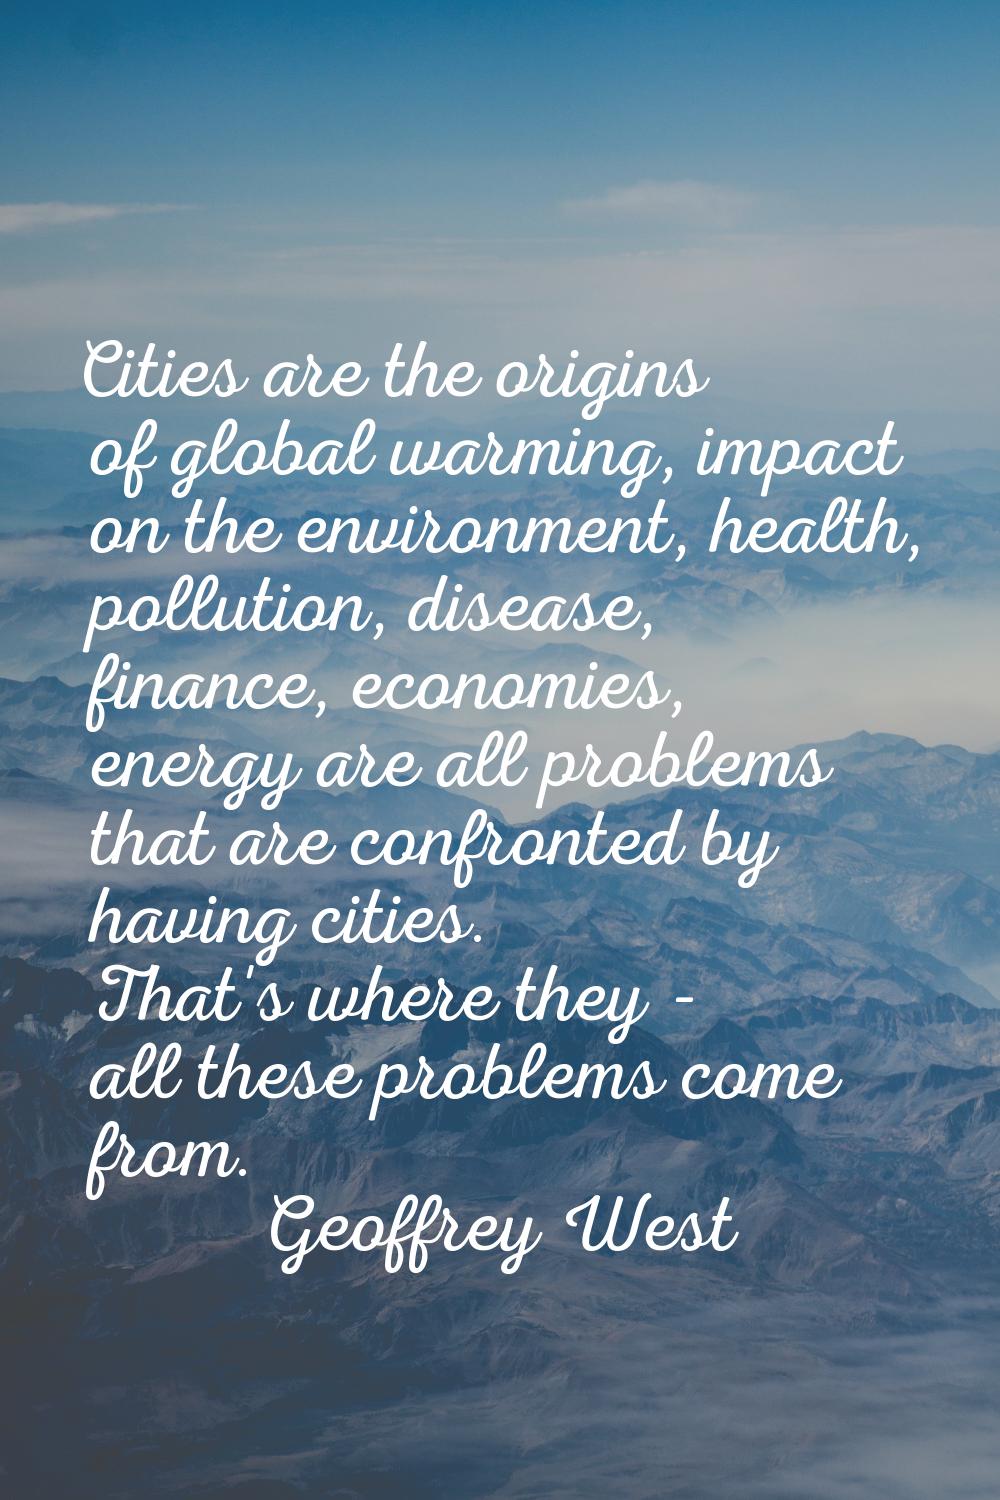 Cities are the origins of global warming, impact on the environment, health, pollution, disease, fi